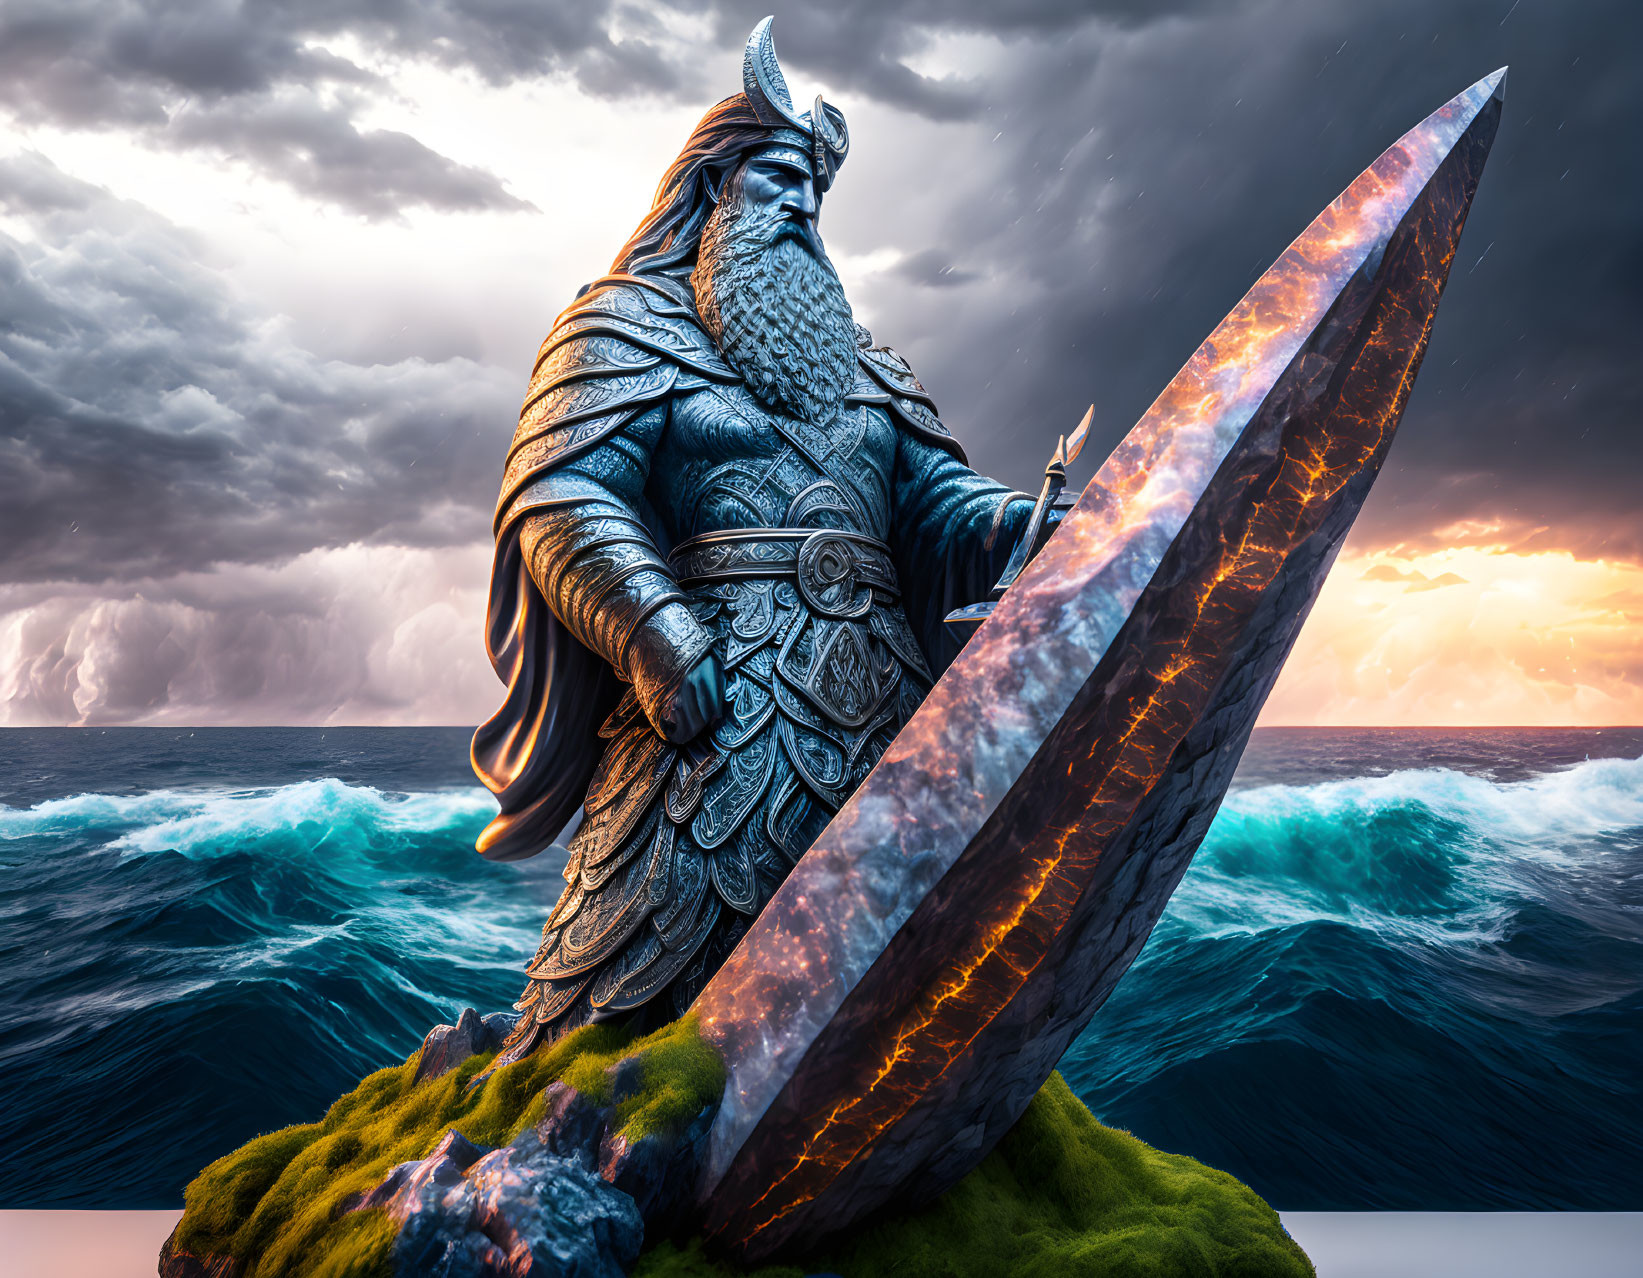 Majestic warrior in ornate armor on rocky outcrop with stormy sea background